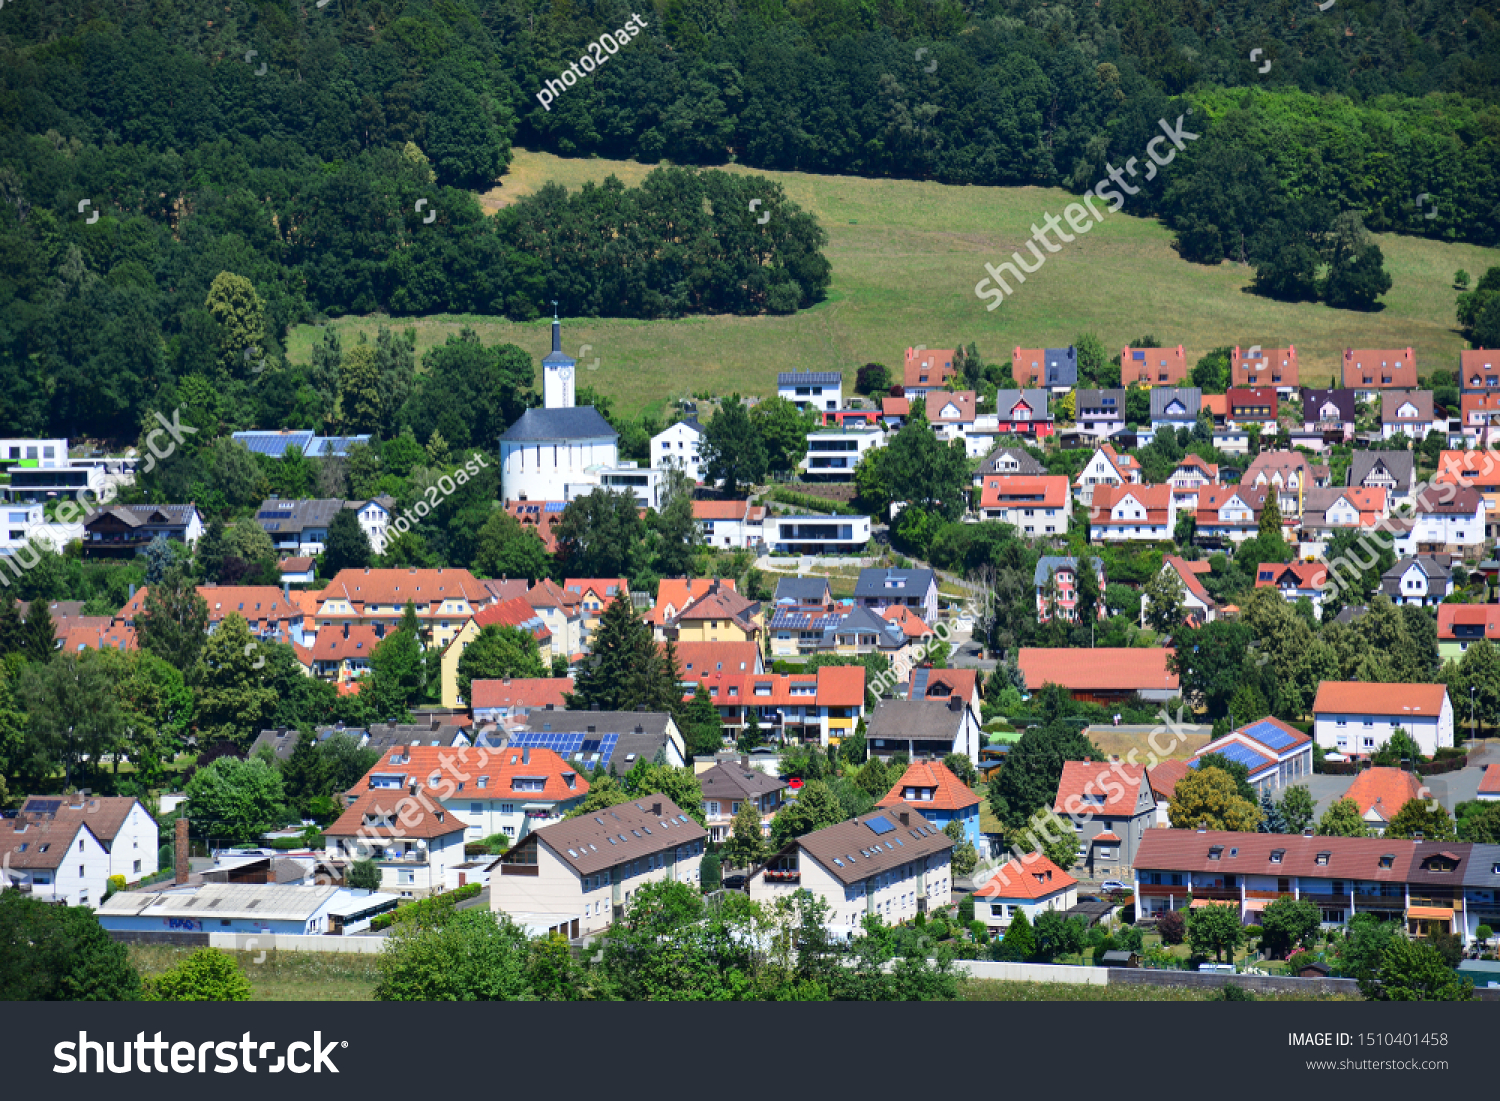 Kulmbach / Germany - 06.30.2018: View on the town of Kulmbach, Bavaria, region Upper Franconia, Germany #1510401458